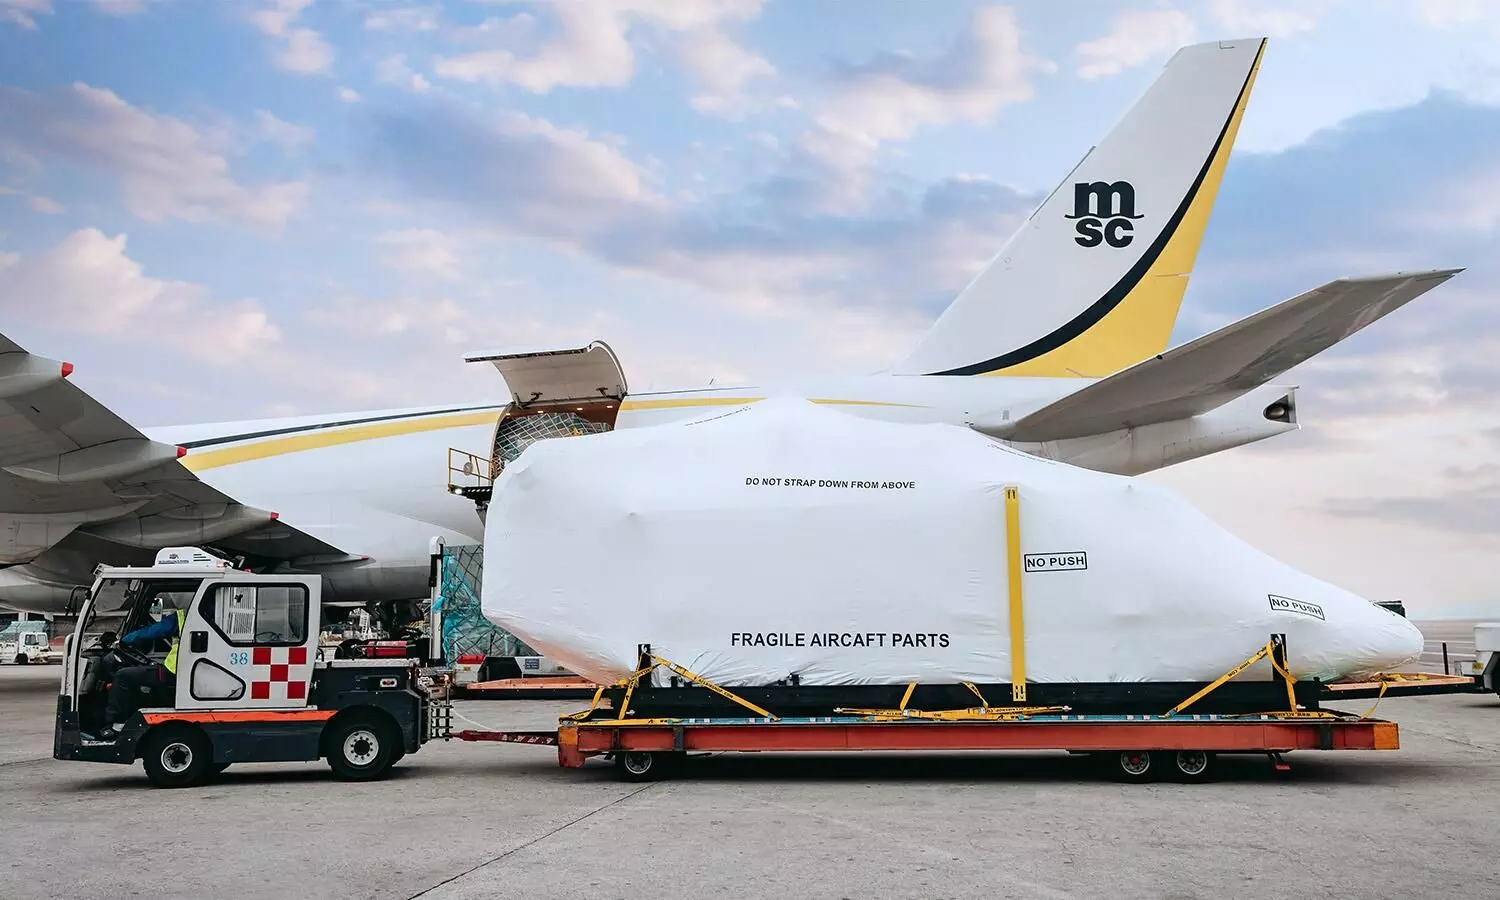 Soaring new heights: MSC Air Cargo expands fleet, global connectivity